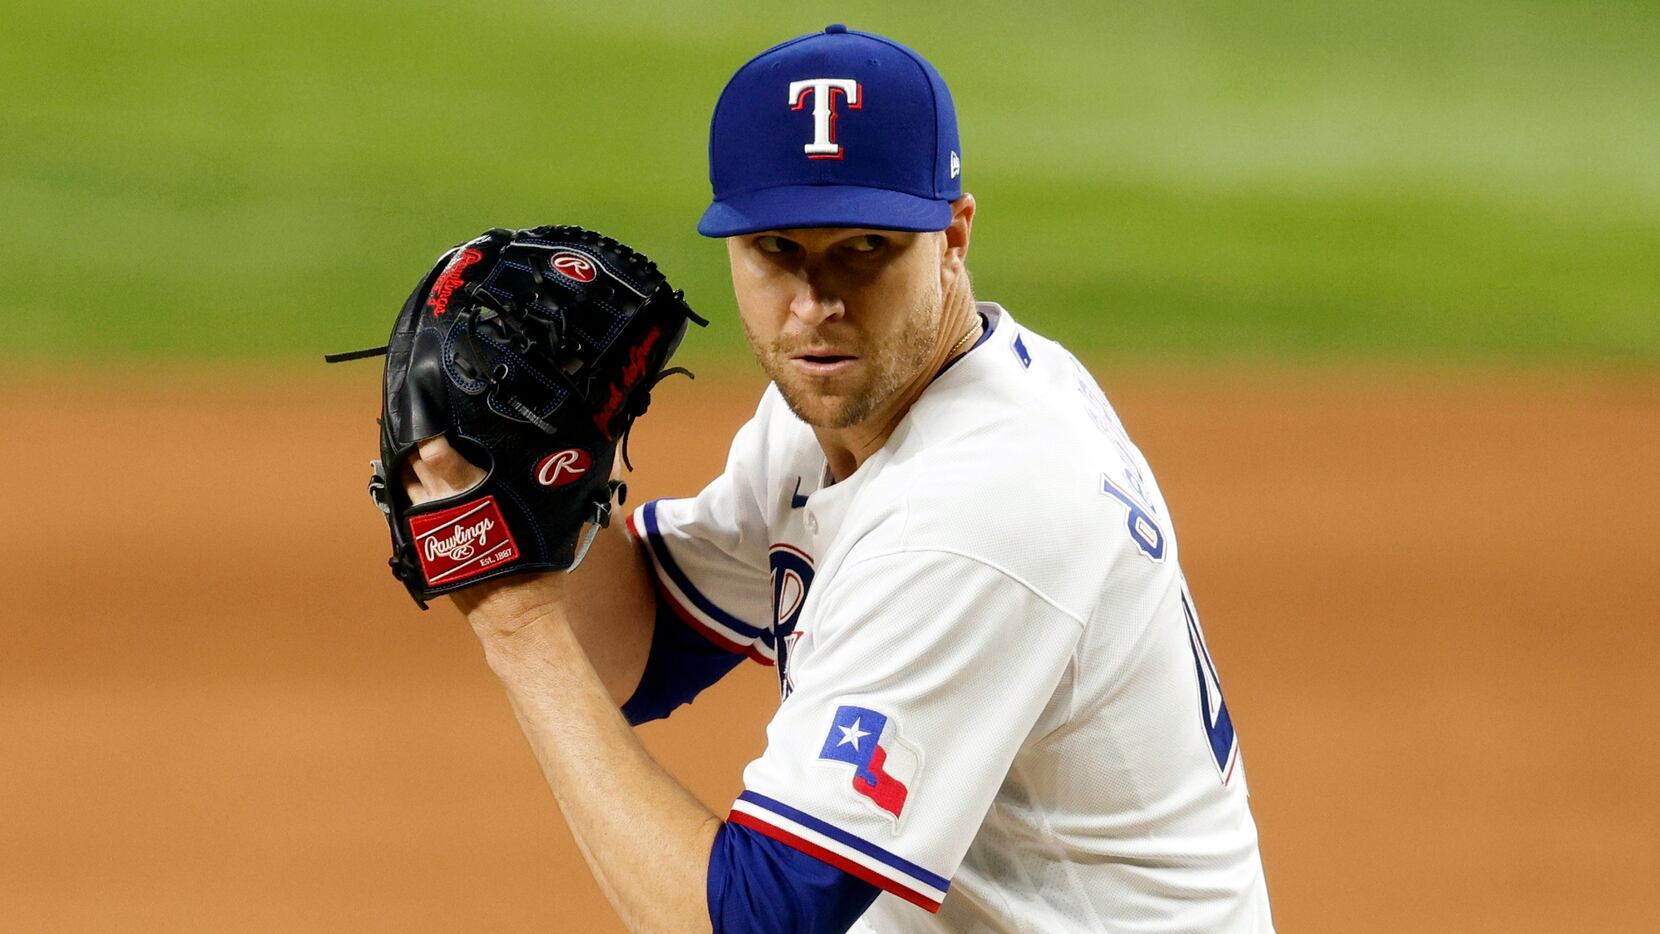 Rangers' Jacob deGrom quells injury concern, handles business for